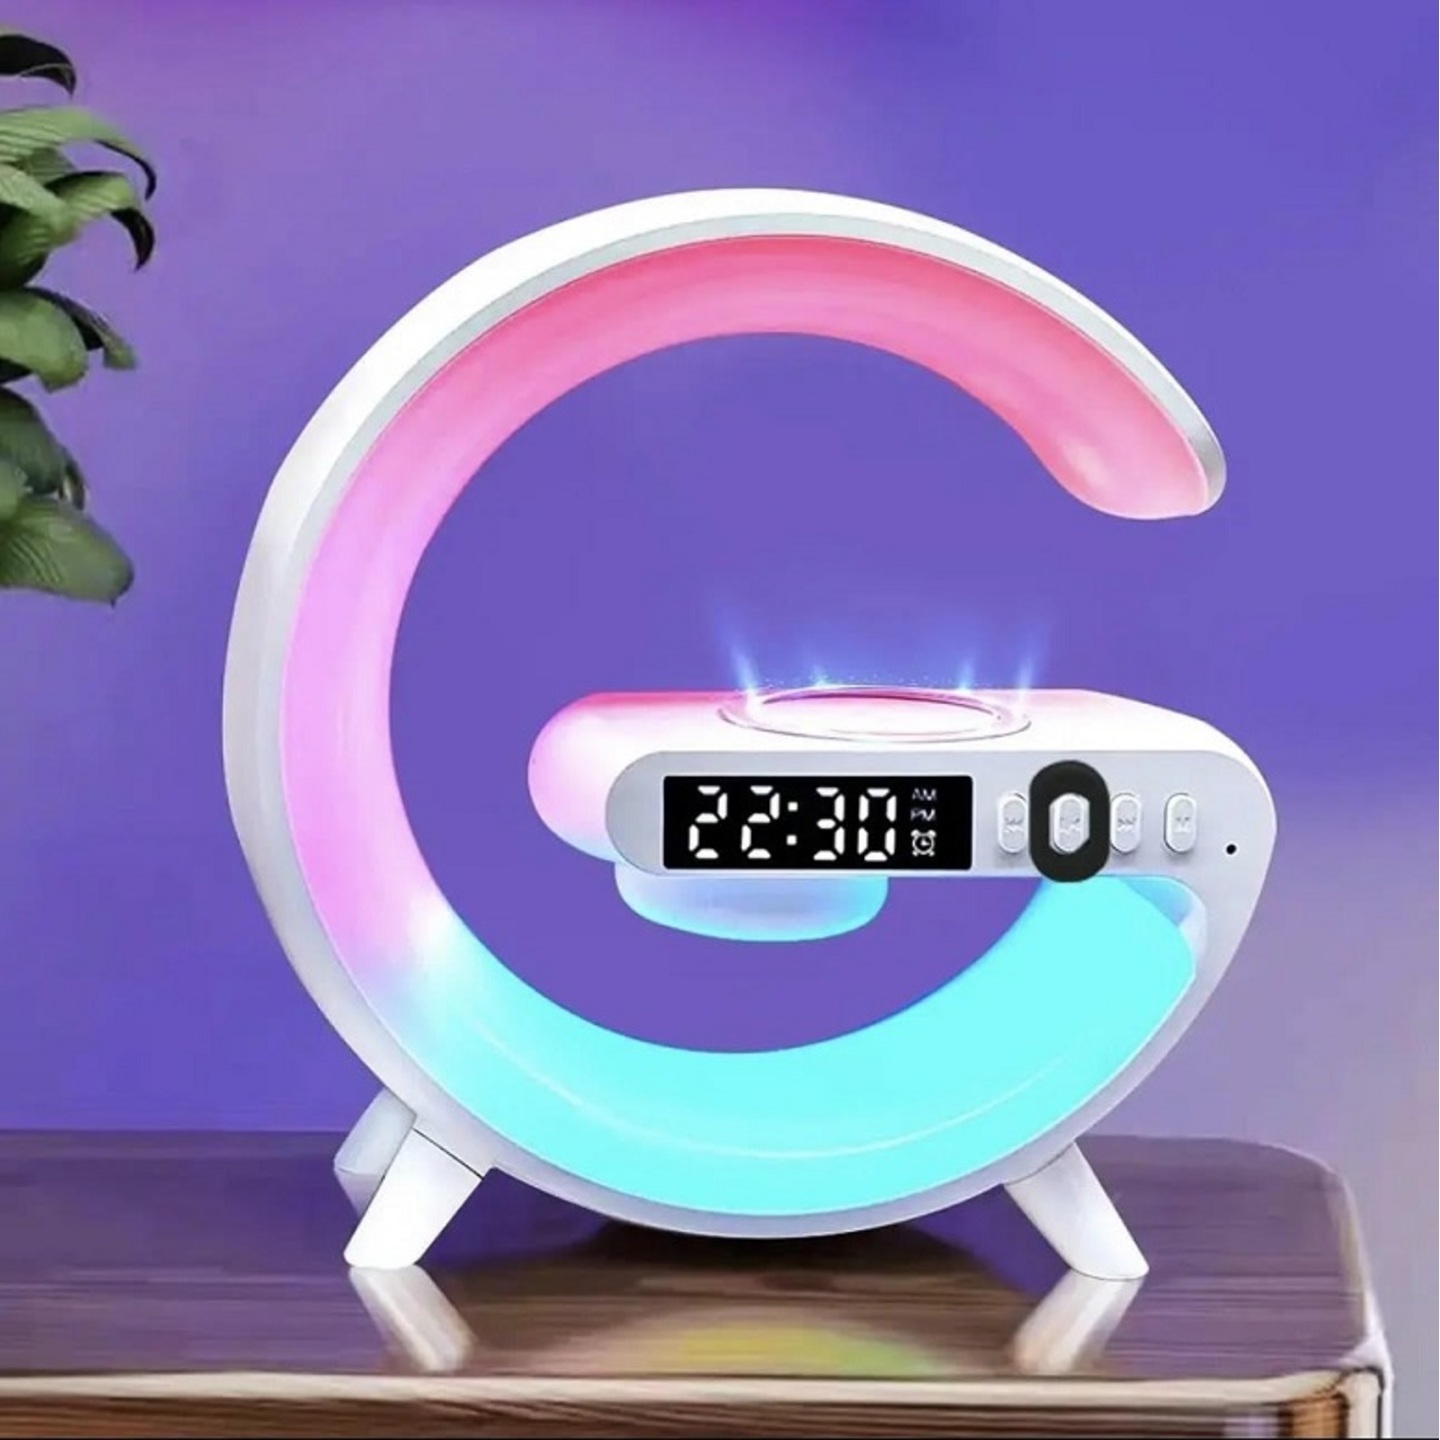 G63 Smart Intelligent RGB LED LAMP with Bluetooth Speakers, Clock and Mobile Wireless Charger